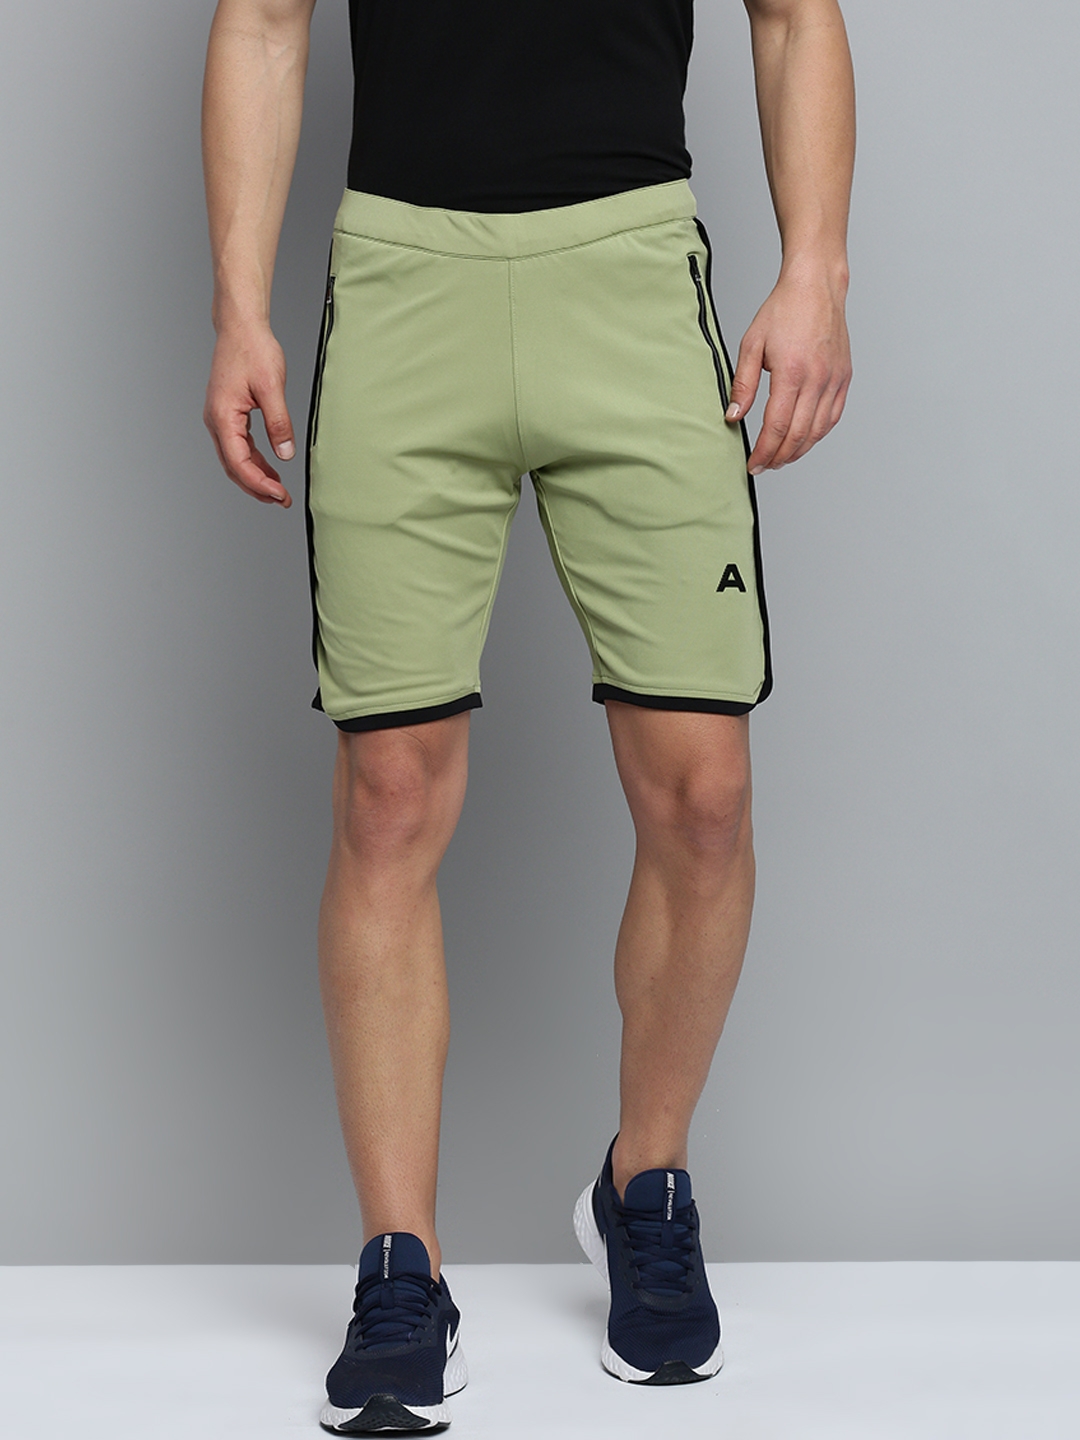 Showoff | SHOWOFF Men's Knee Length Solid Green Mid-Rise Sports Shorts 0